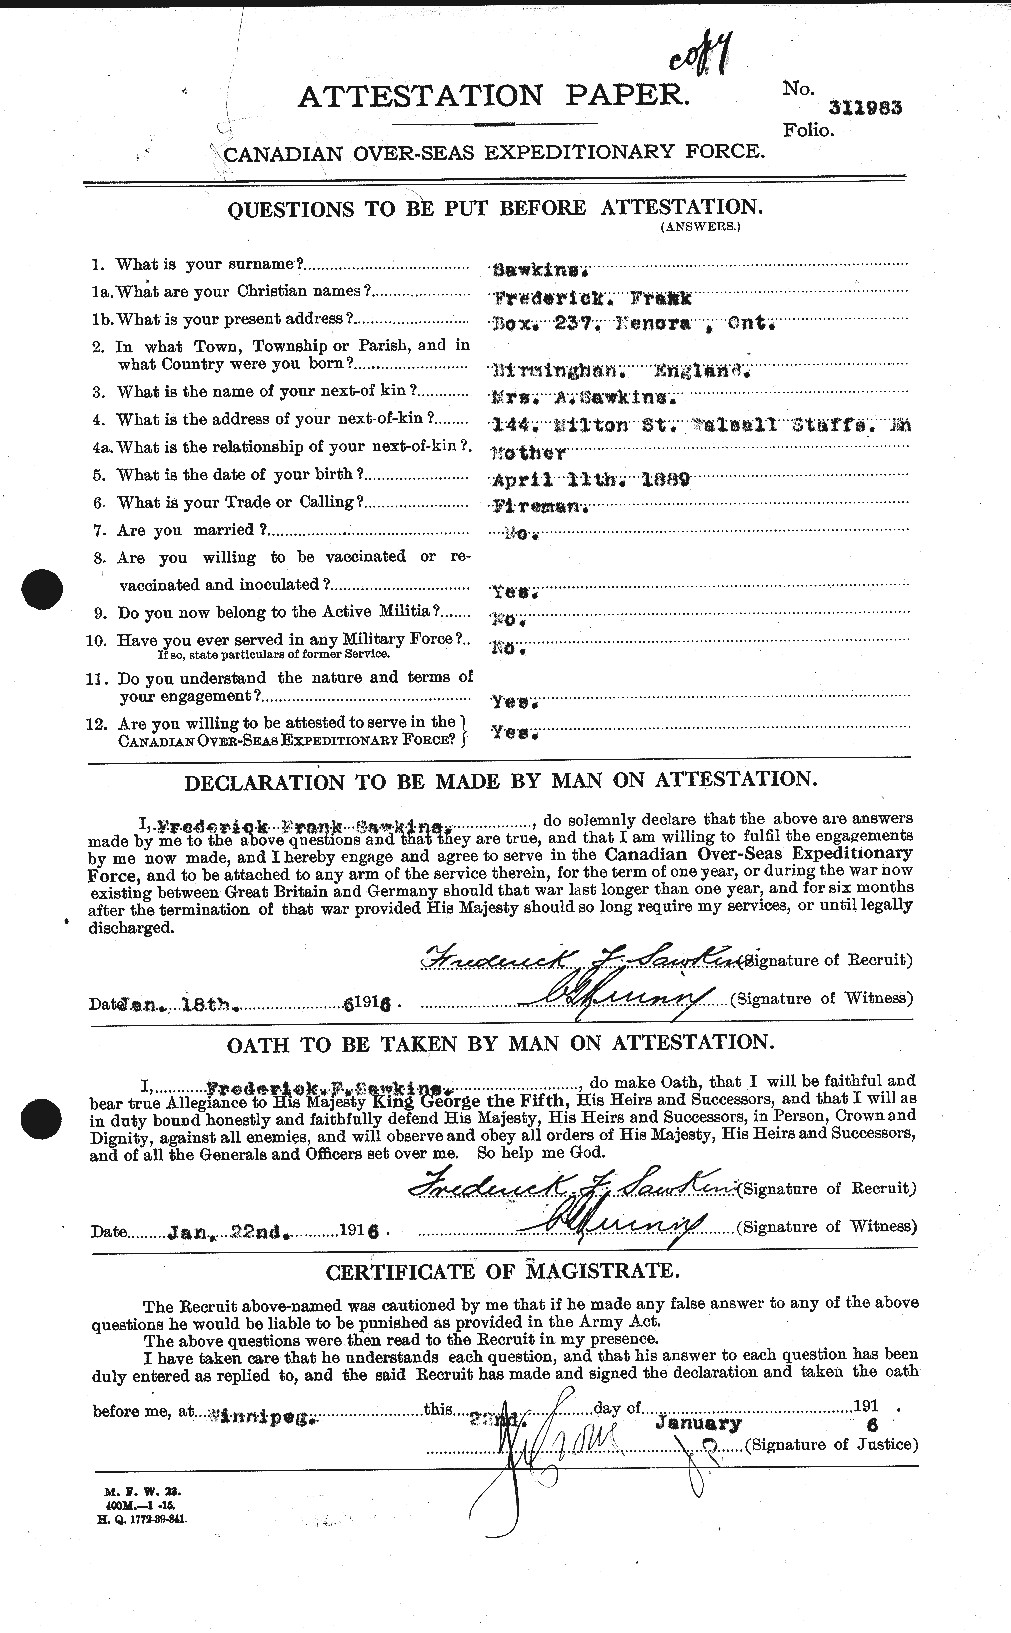 Personnel Records of the First World War - CEF 084216a